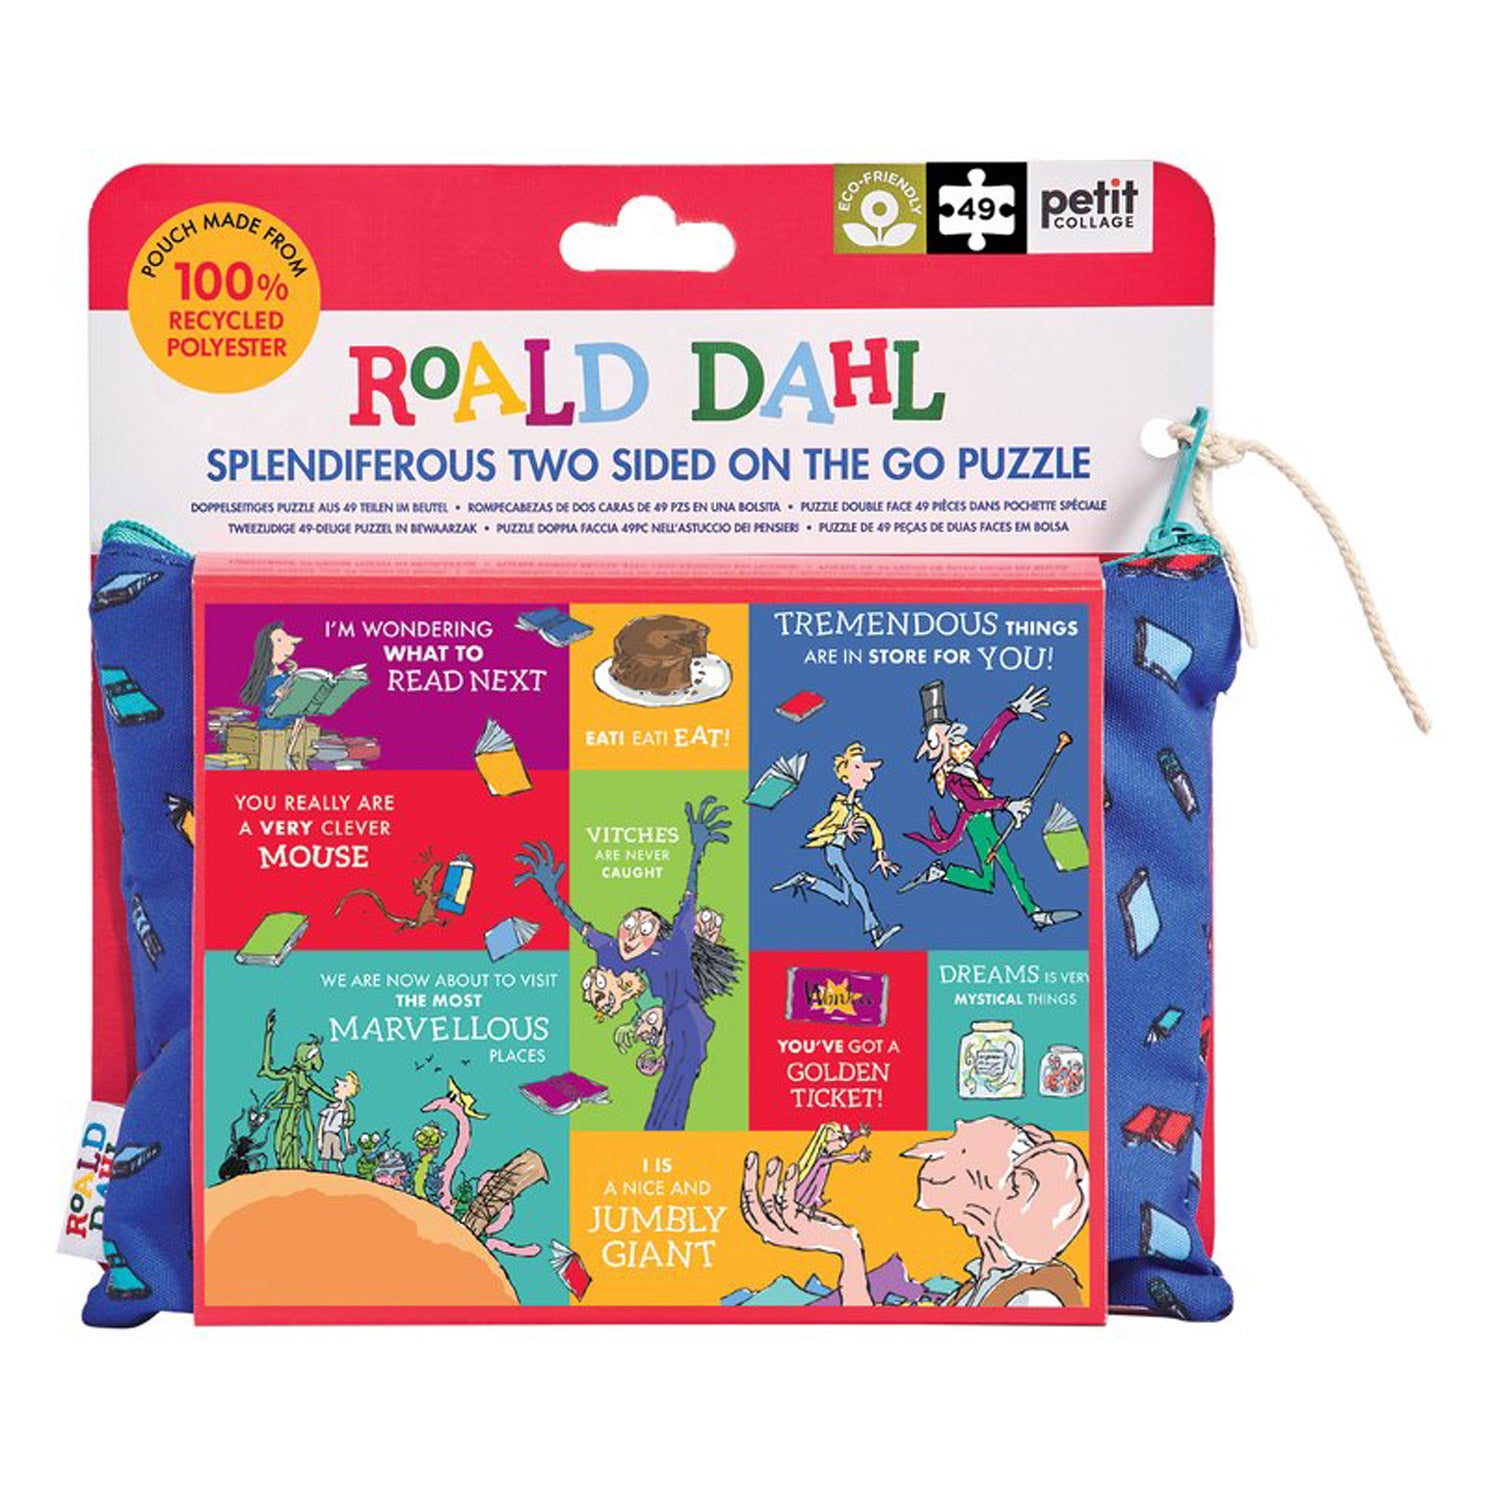 Splendiferous Two Sided On The Go Puzzle based on Road Dahl stories with illustrations by Quentin Blake